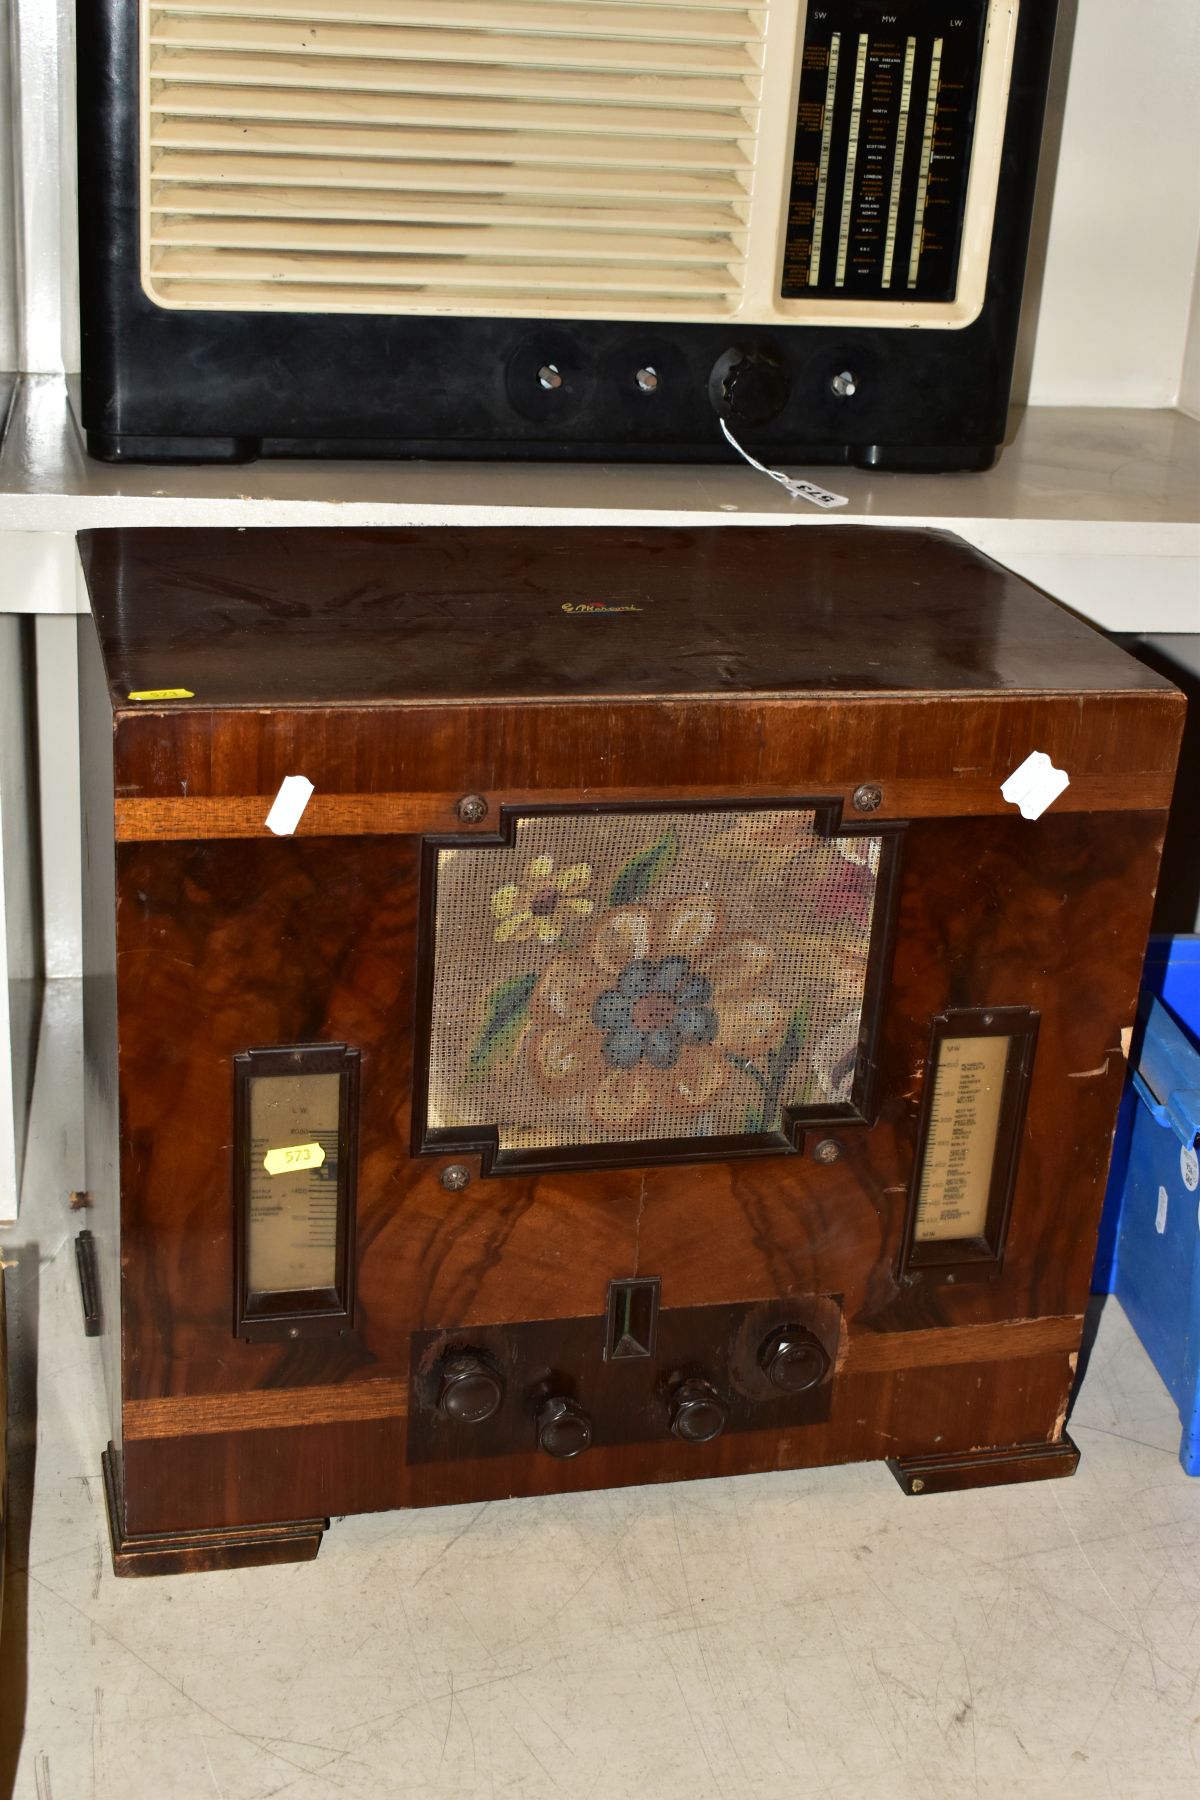 A SONY TC-255 SOLID STATE REEL TO REEL TAPE RECORDER, together with an Elizabethan Popular 400 - Image 5 of 7